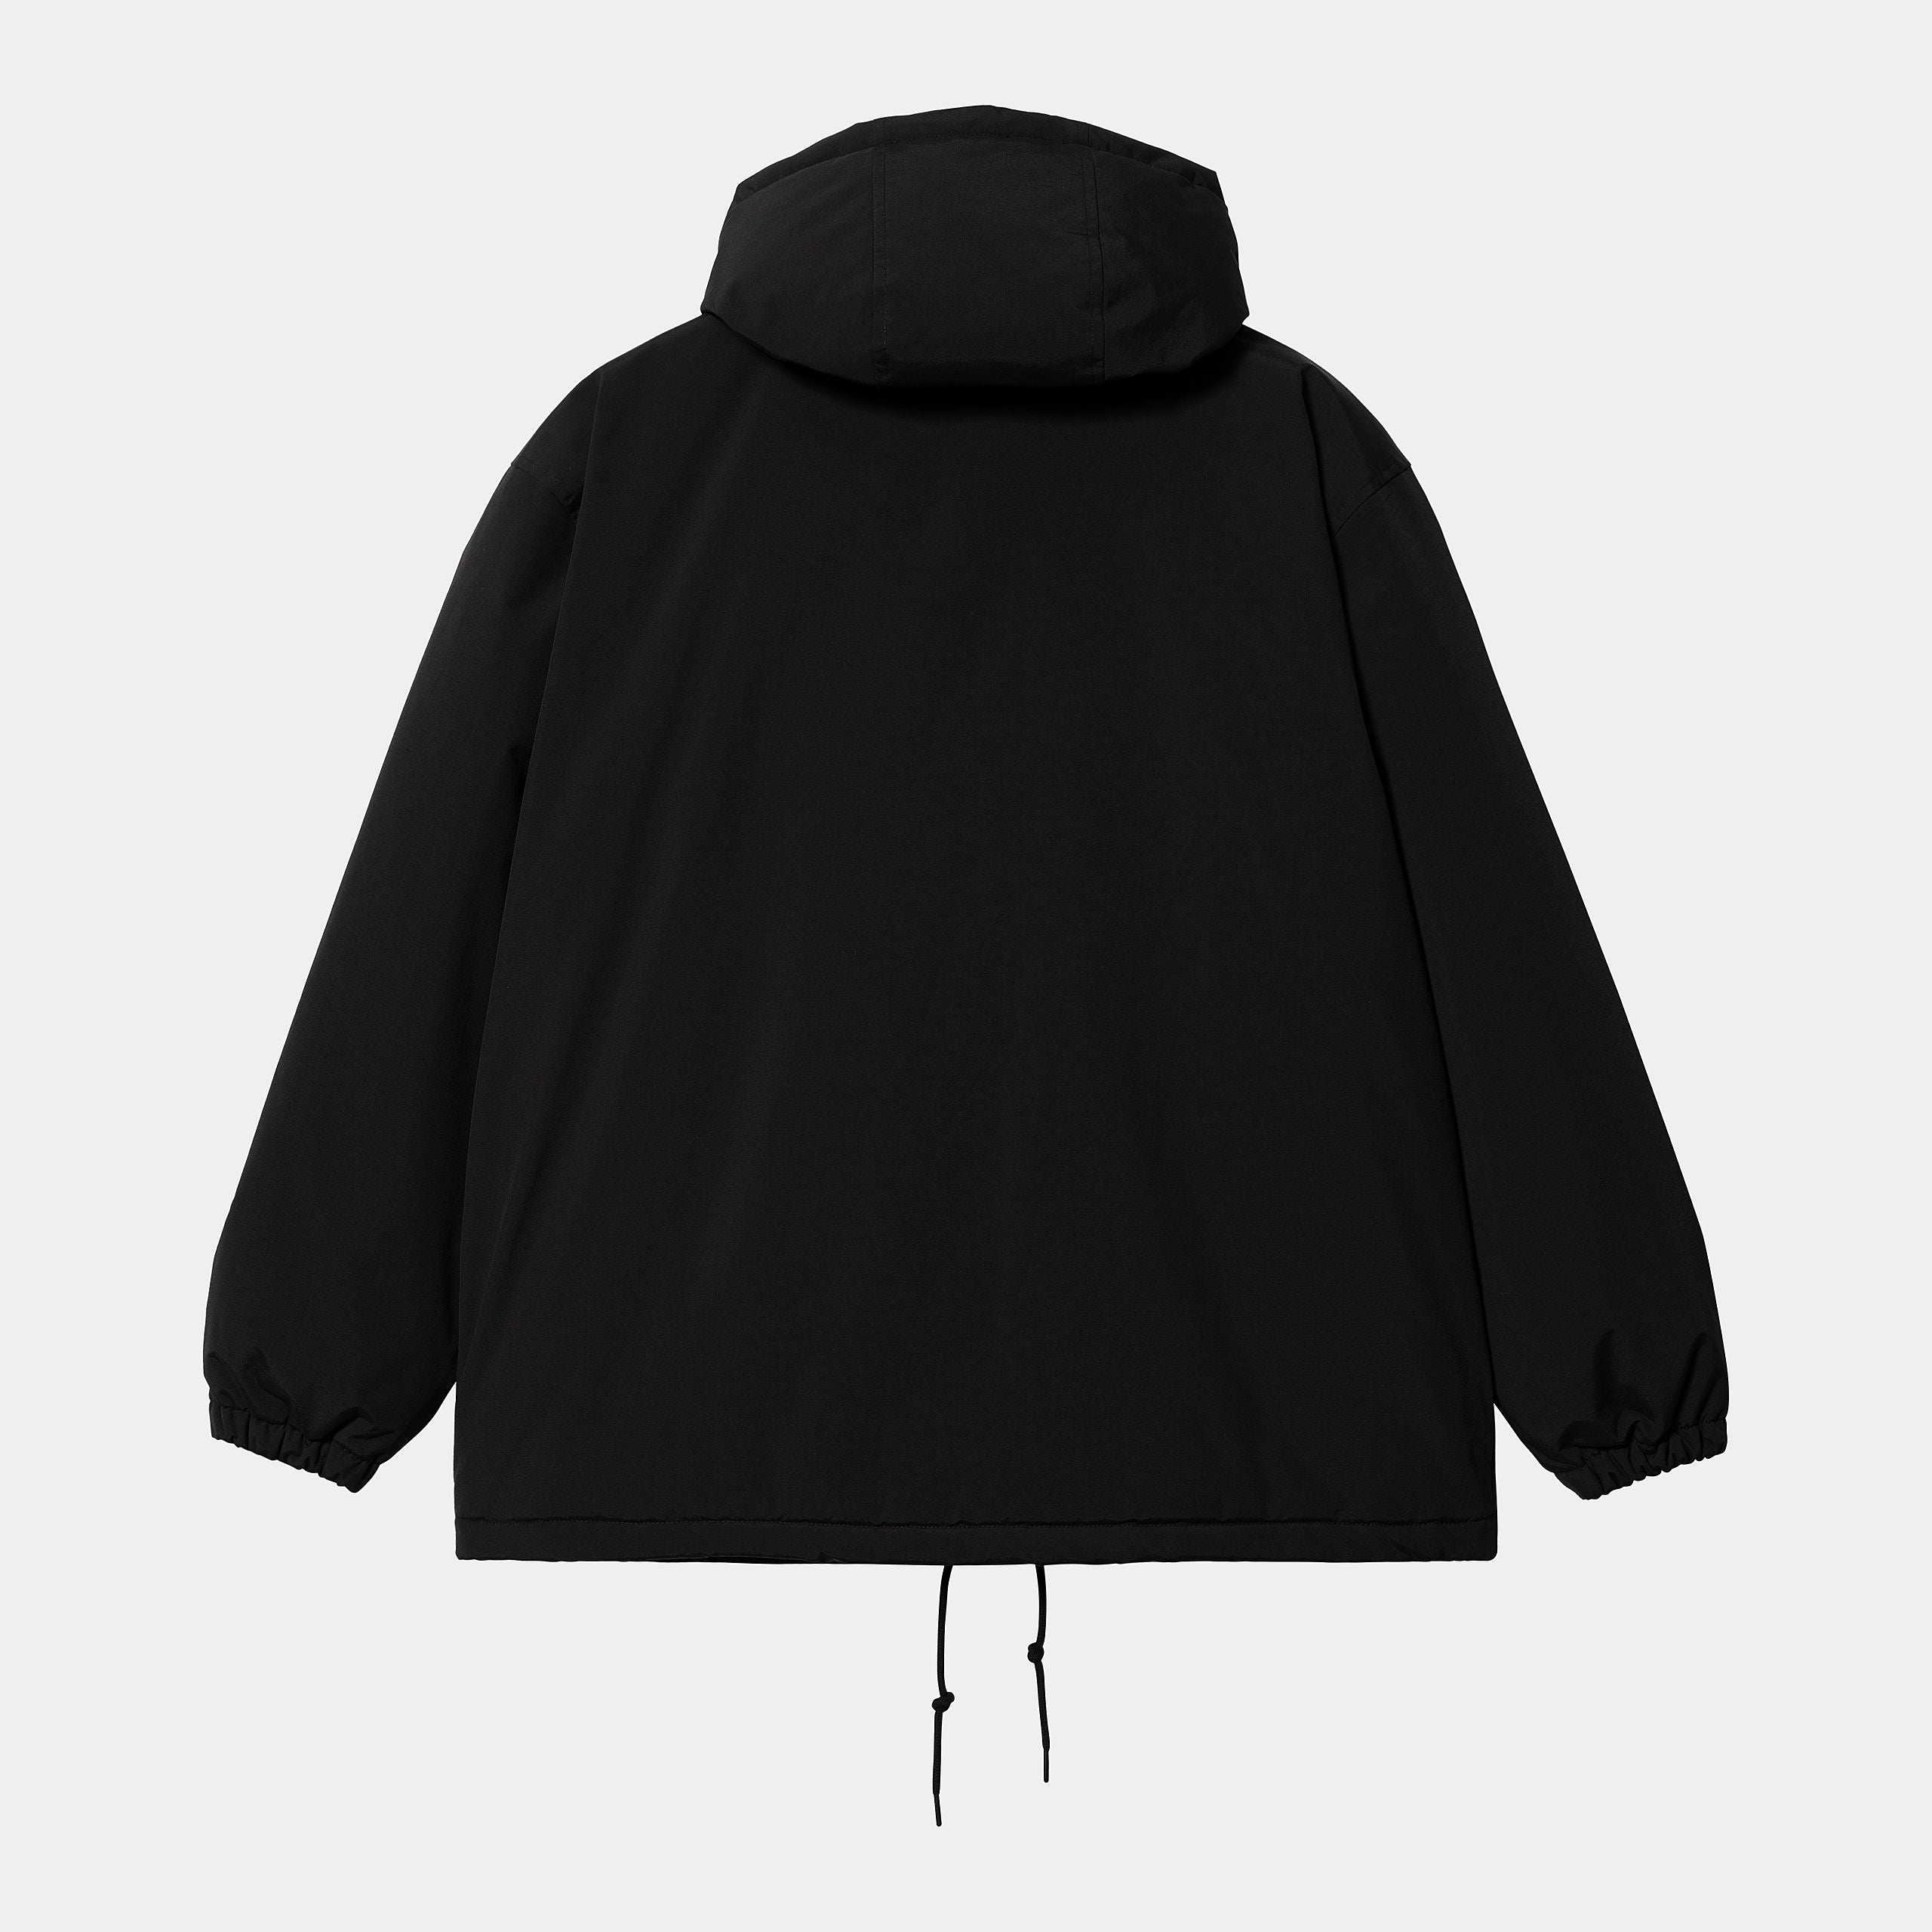 HOODED COACH JACKET / CARHARTT WIP / BLACK - Spoon Clothes